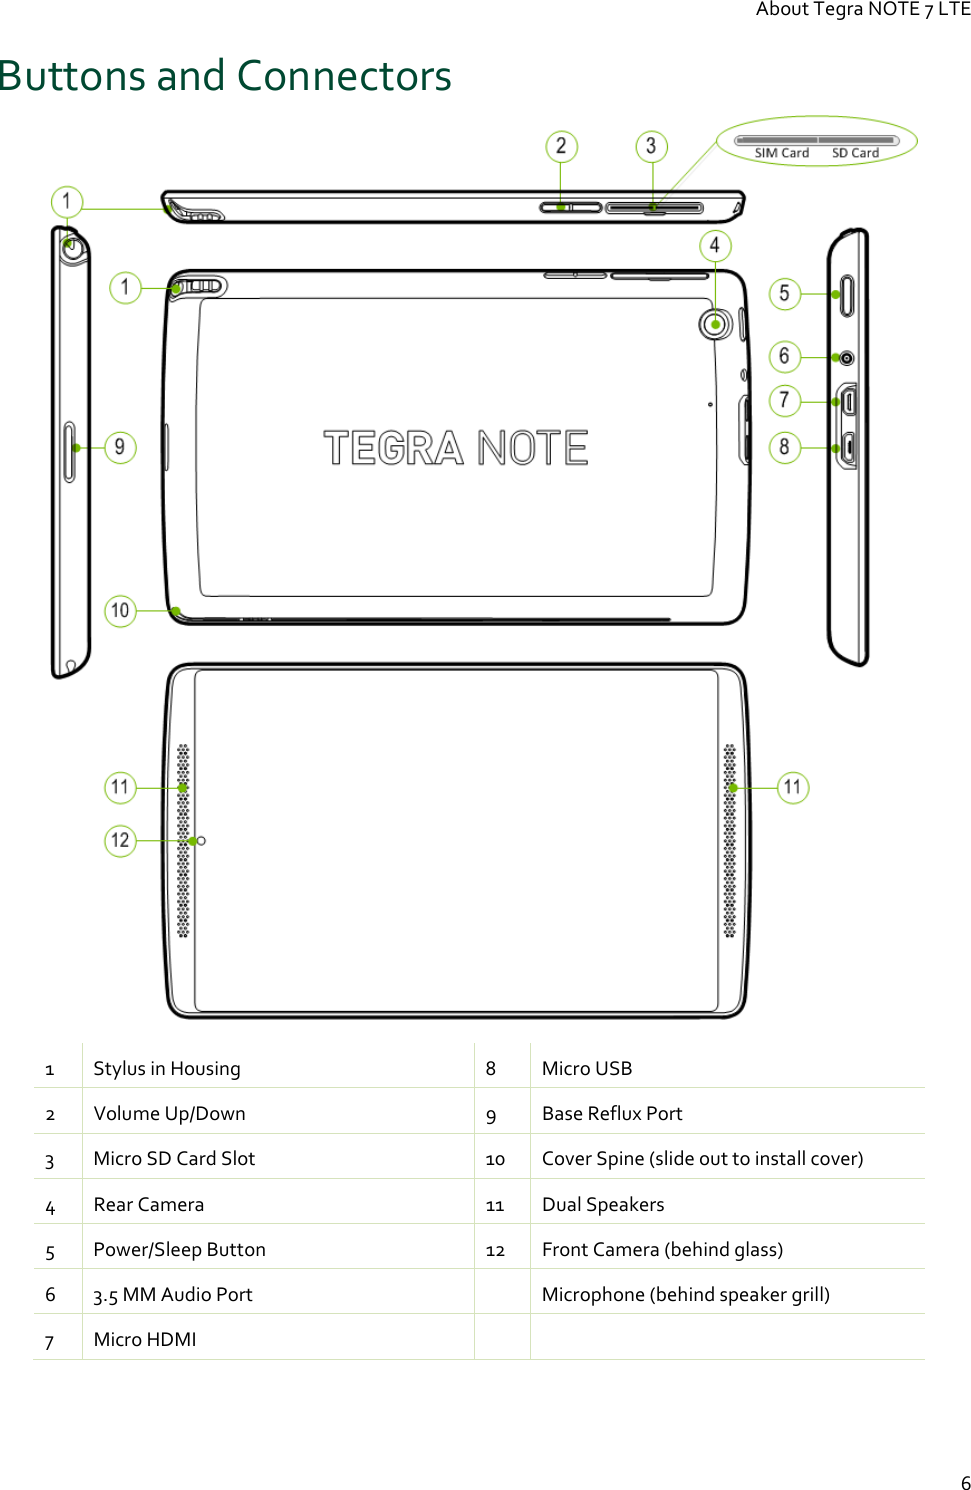 About Tegra NOTE 7 LTE  6 Buttons and Connectors   1  Stylus in Housing  8  Micro USB 2  Volume Up/Down  9  Base Reflux Port 3  Micro SD Card Slot  10  Cover Spine (slide out to install cover) 4  Rear Camera  11  Dual Speakers 5  Power/Sleep Button  12  Front Camera (behind glass) 6  3.5 MM Audio Port    Microphone (behind speaker grill) 7  Micro HDMI     